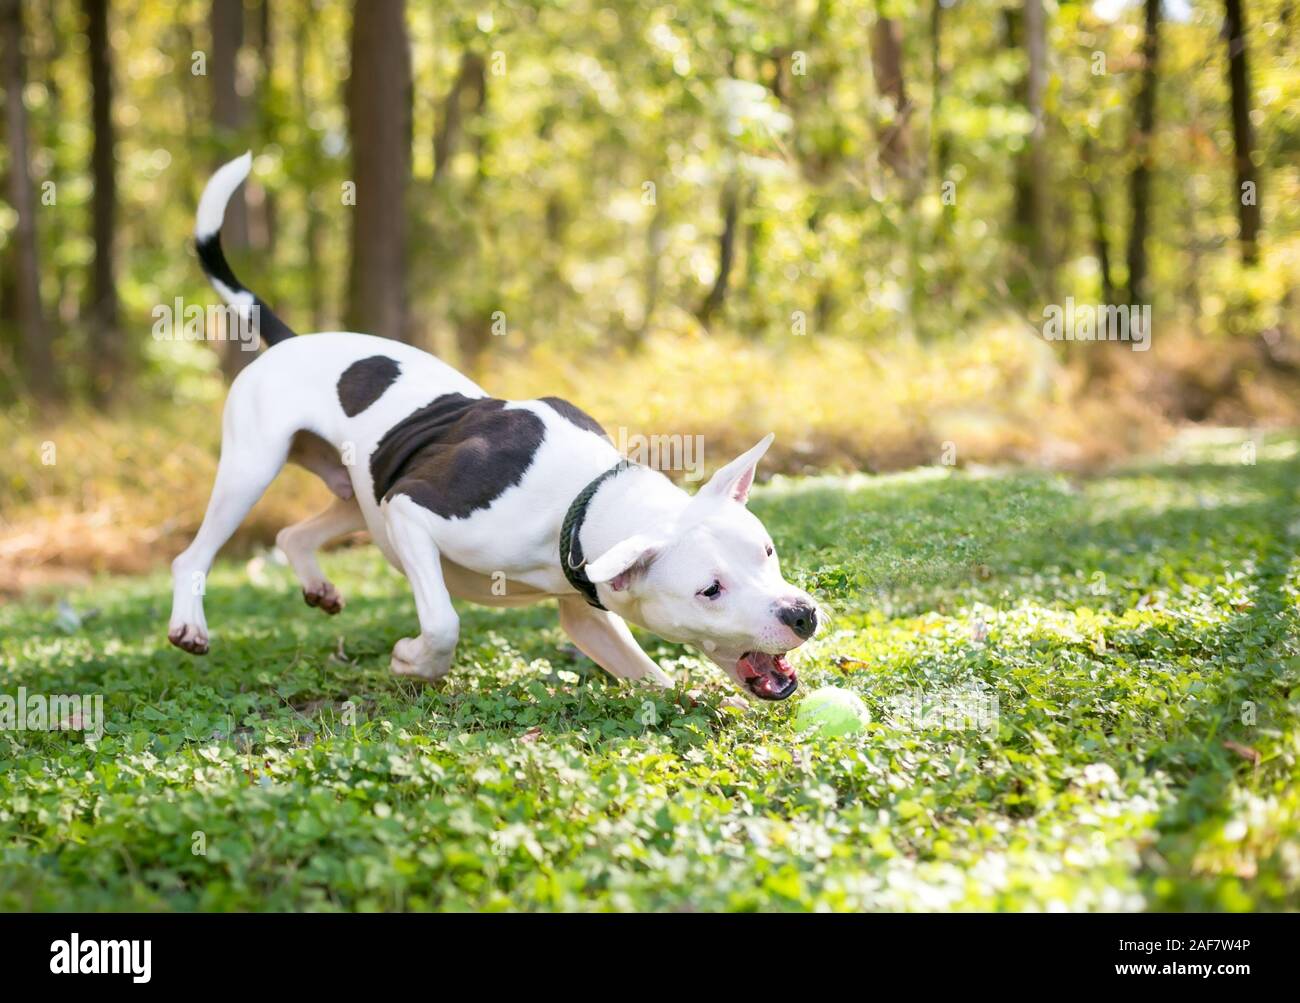 A white Pit Bull Terrier mixed breed dog with brown spots chasing a ball outdoors Stock Photo